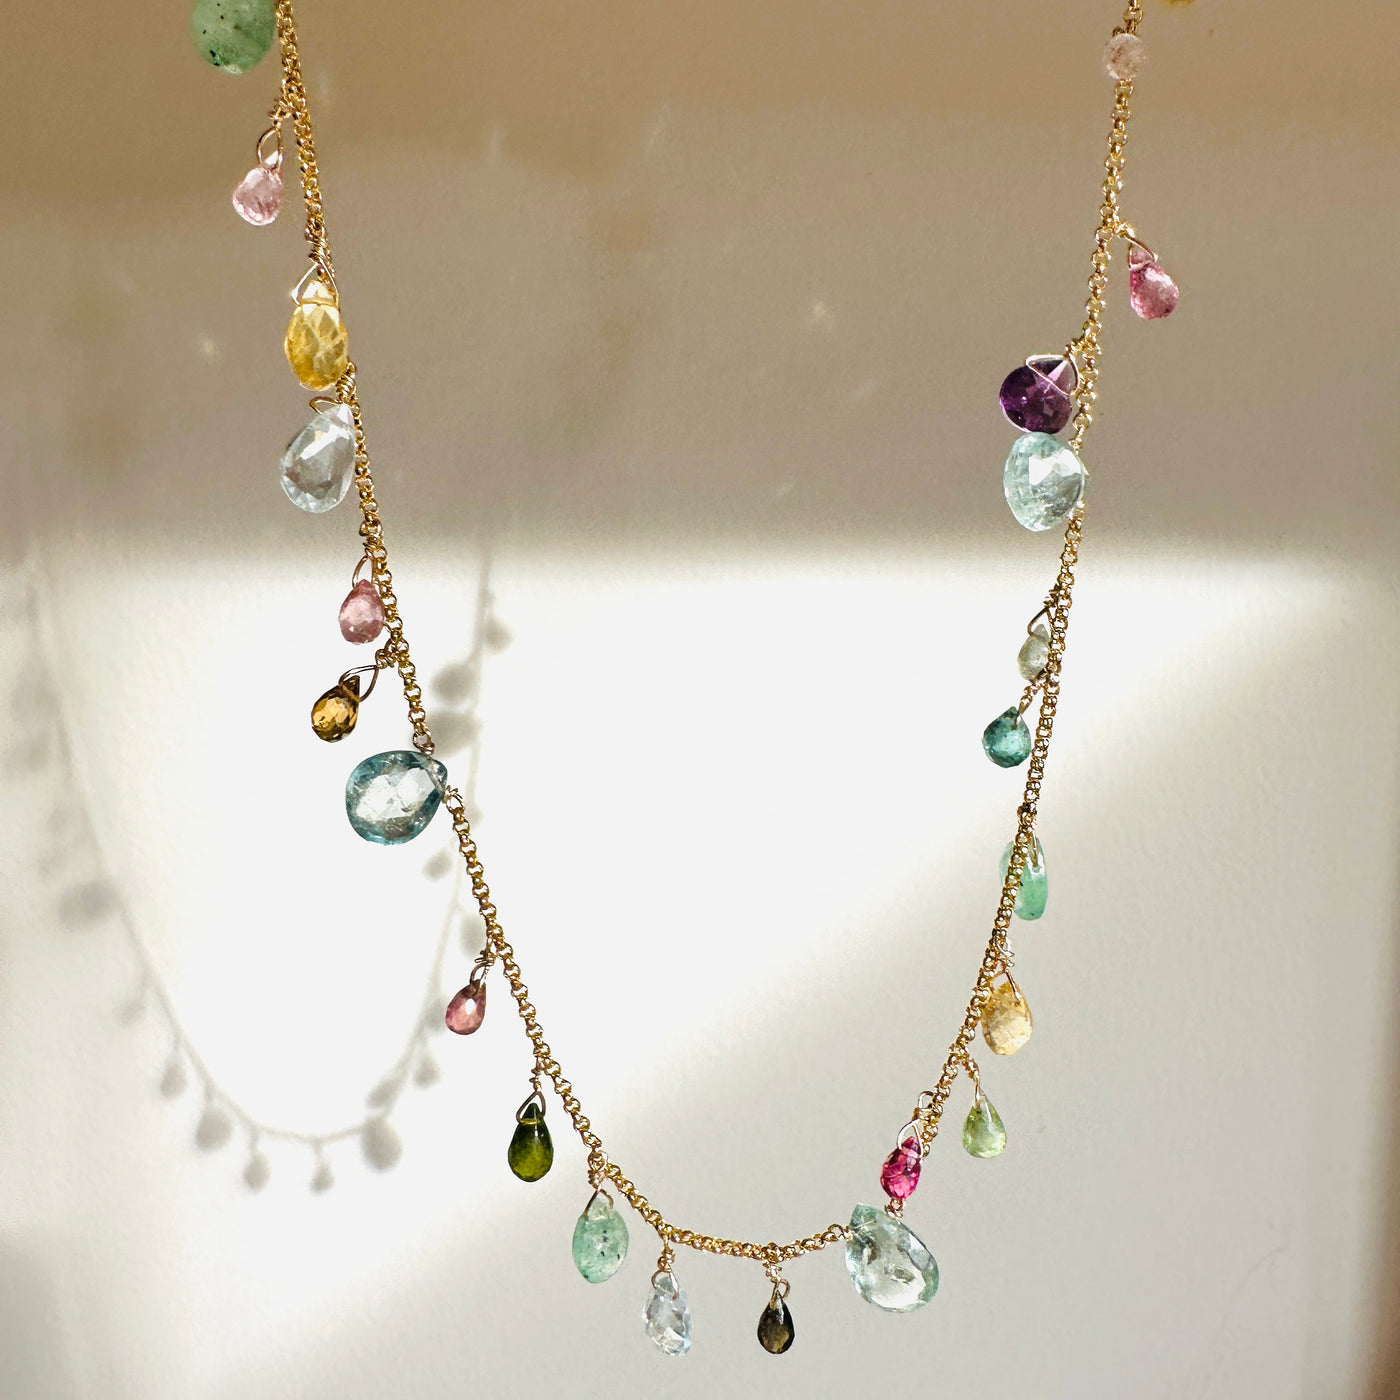 'Crystal party' Necklace